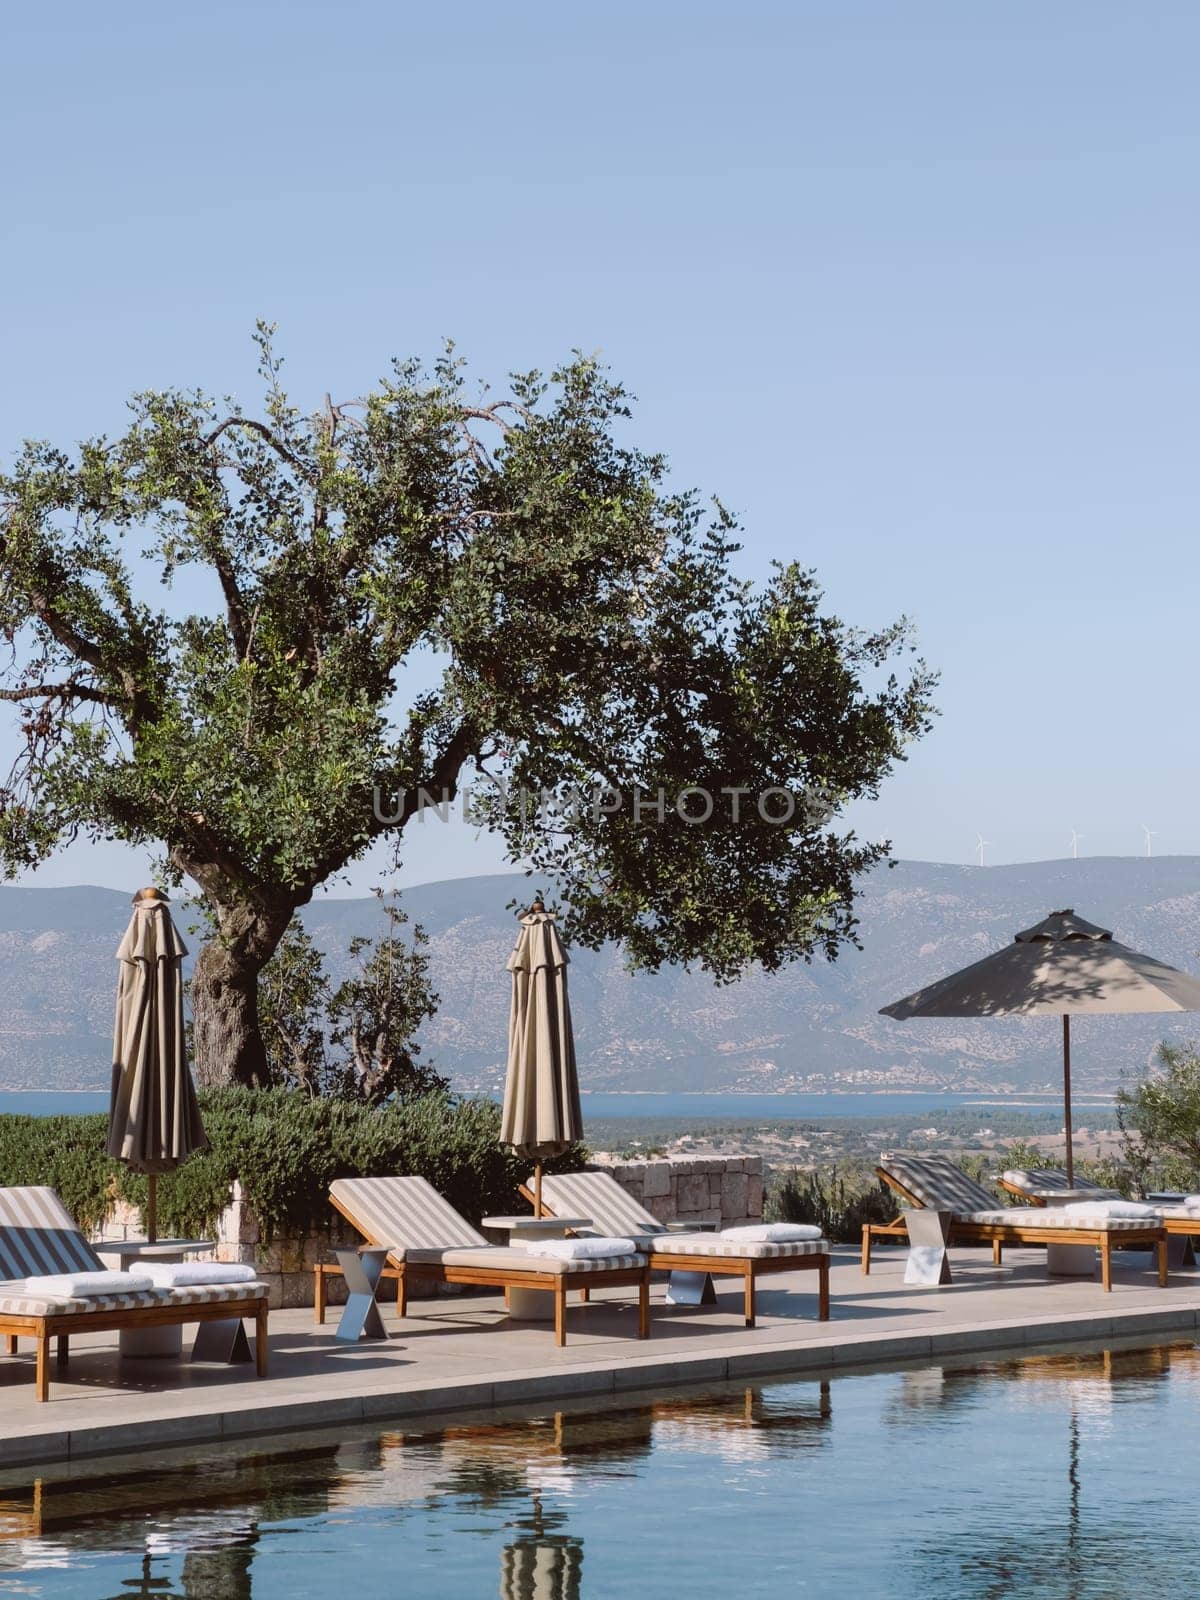 Sun loungers and sun umbrellas stand by the pool against the backdrop of the mountains. Hotel Amanzoe, Greece. High quality photo